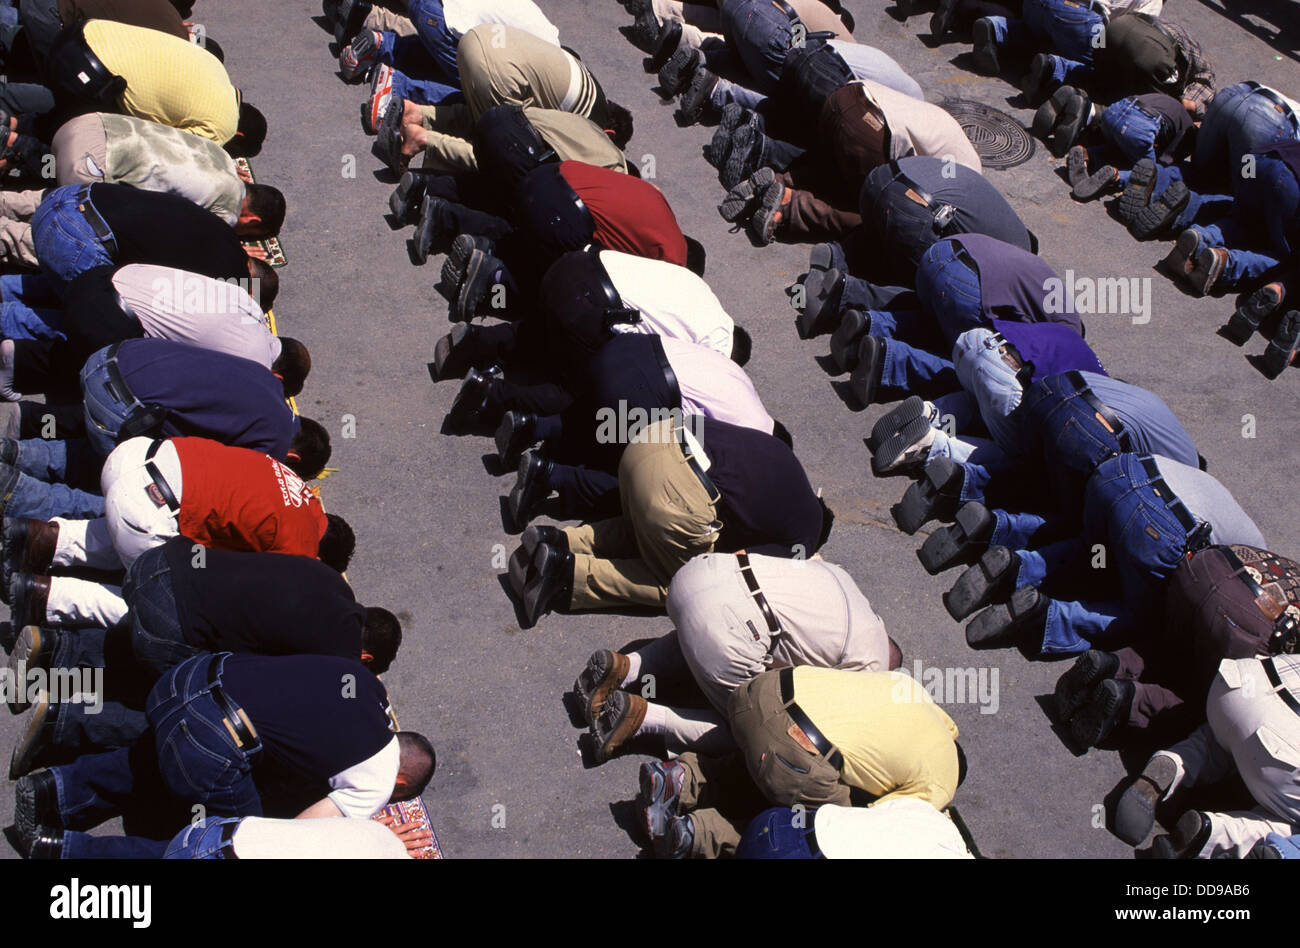 Palestinian men prostrate themselves during the Salah prayer in the Old City Jerusalem Israel Stock Photo